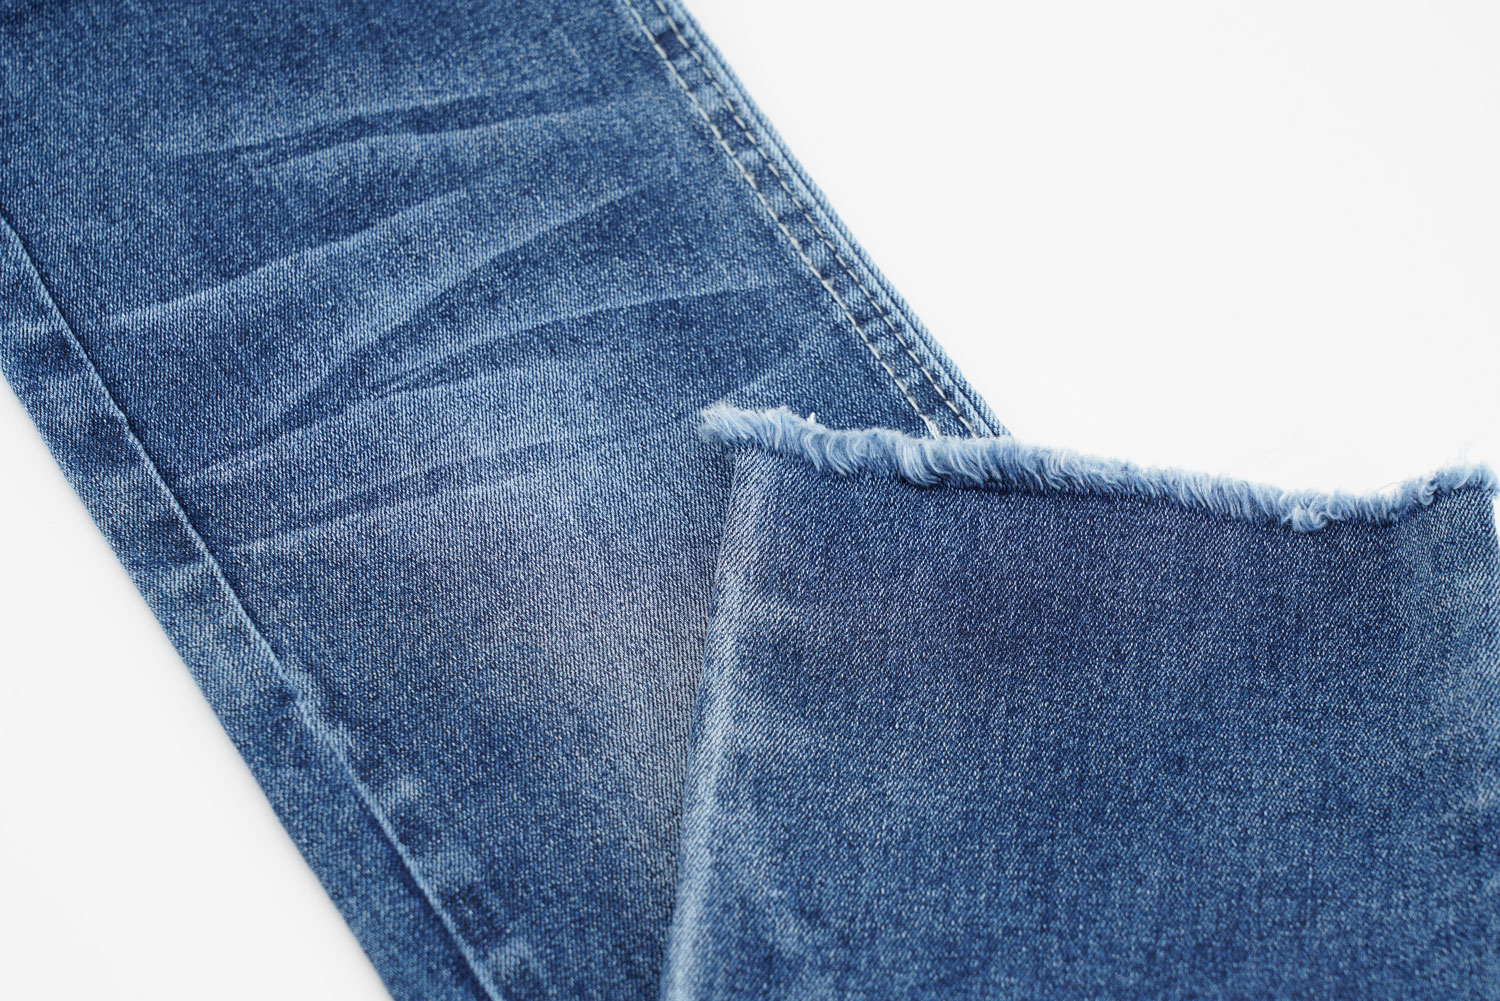 Advantages of Selecting High Stretch Denim Fabric 1